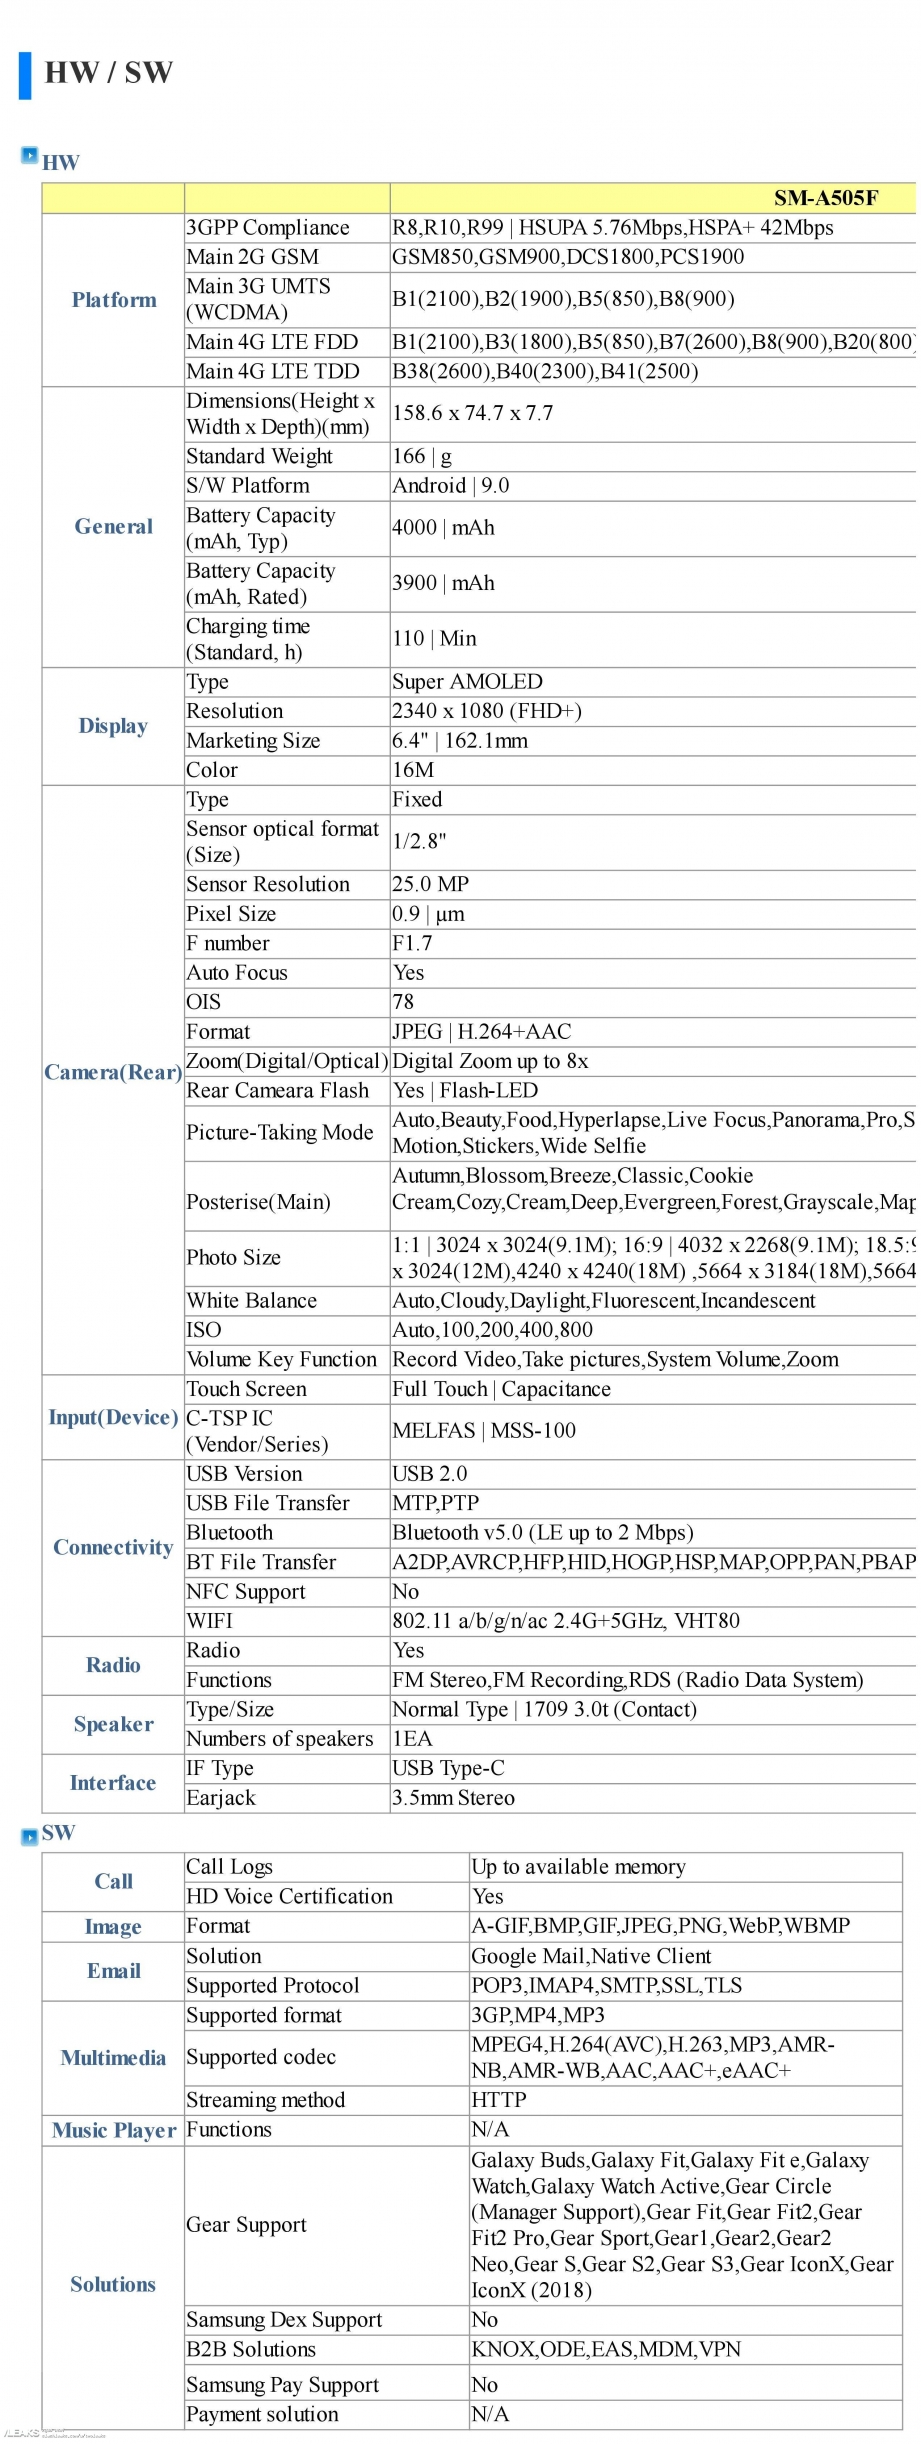 galaxy-a50-specs-and-schematics-leaked-through-user-manual.jpg